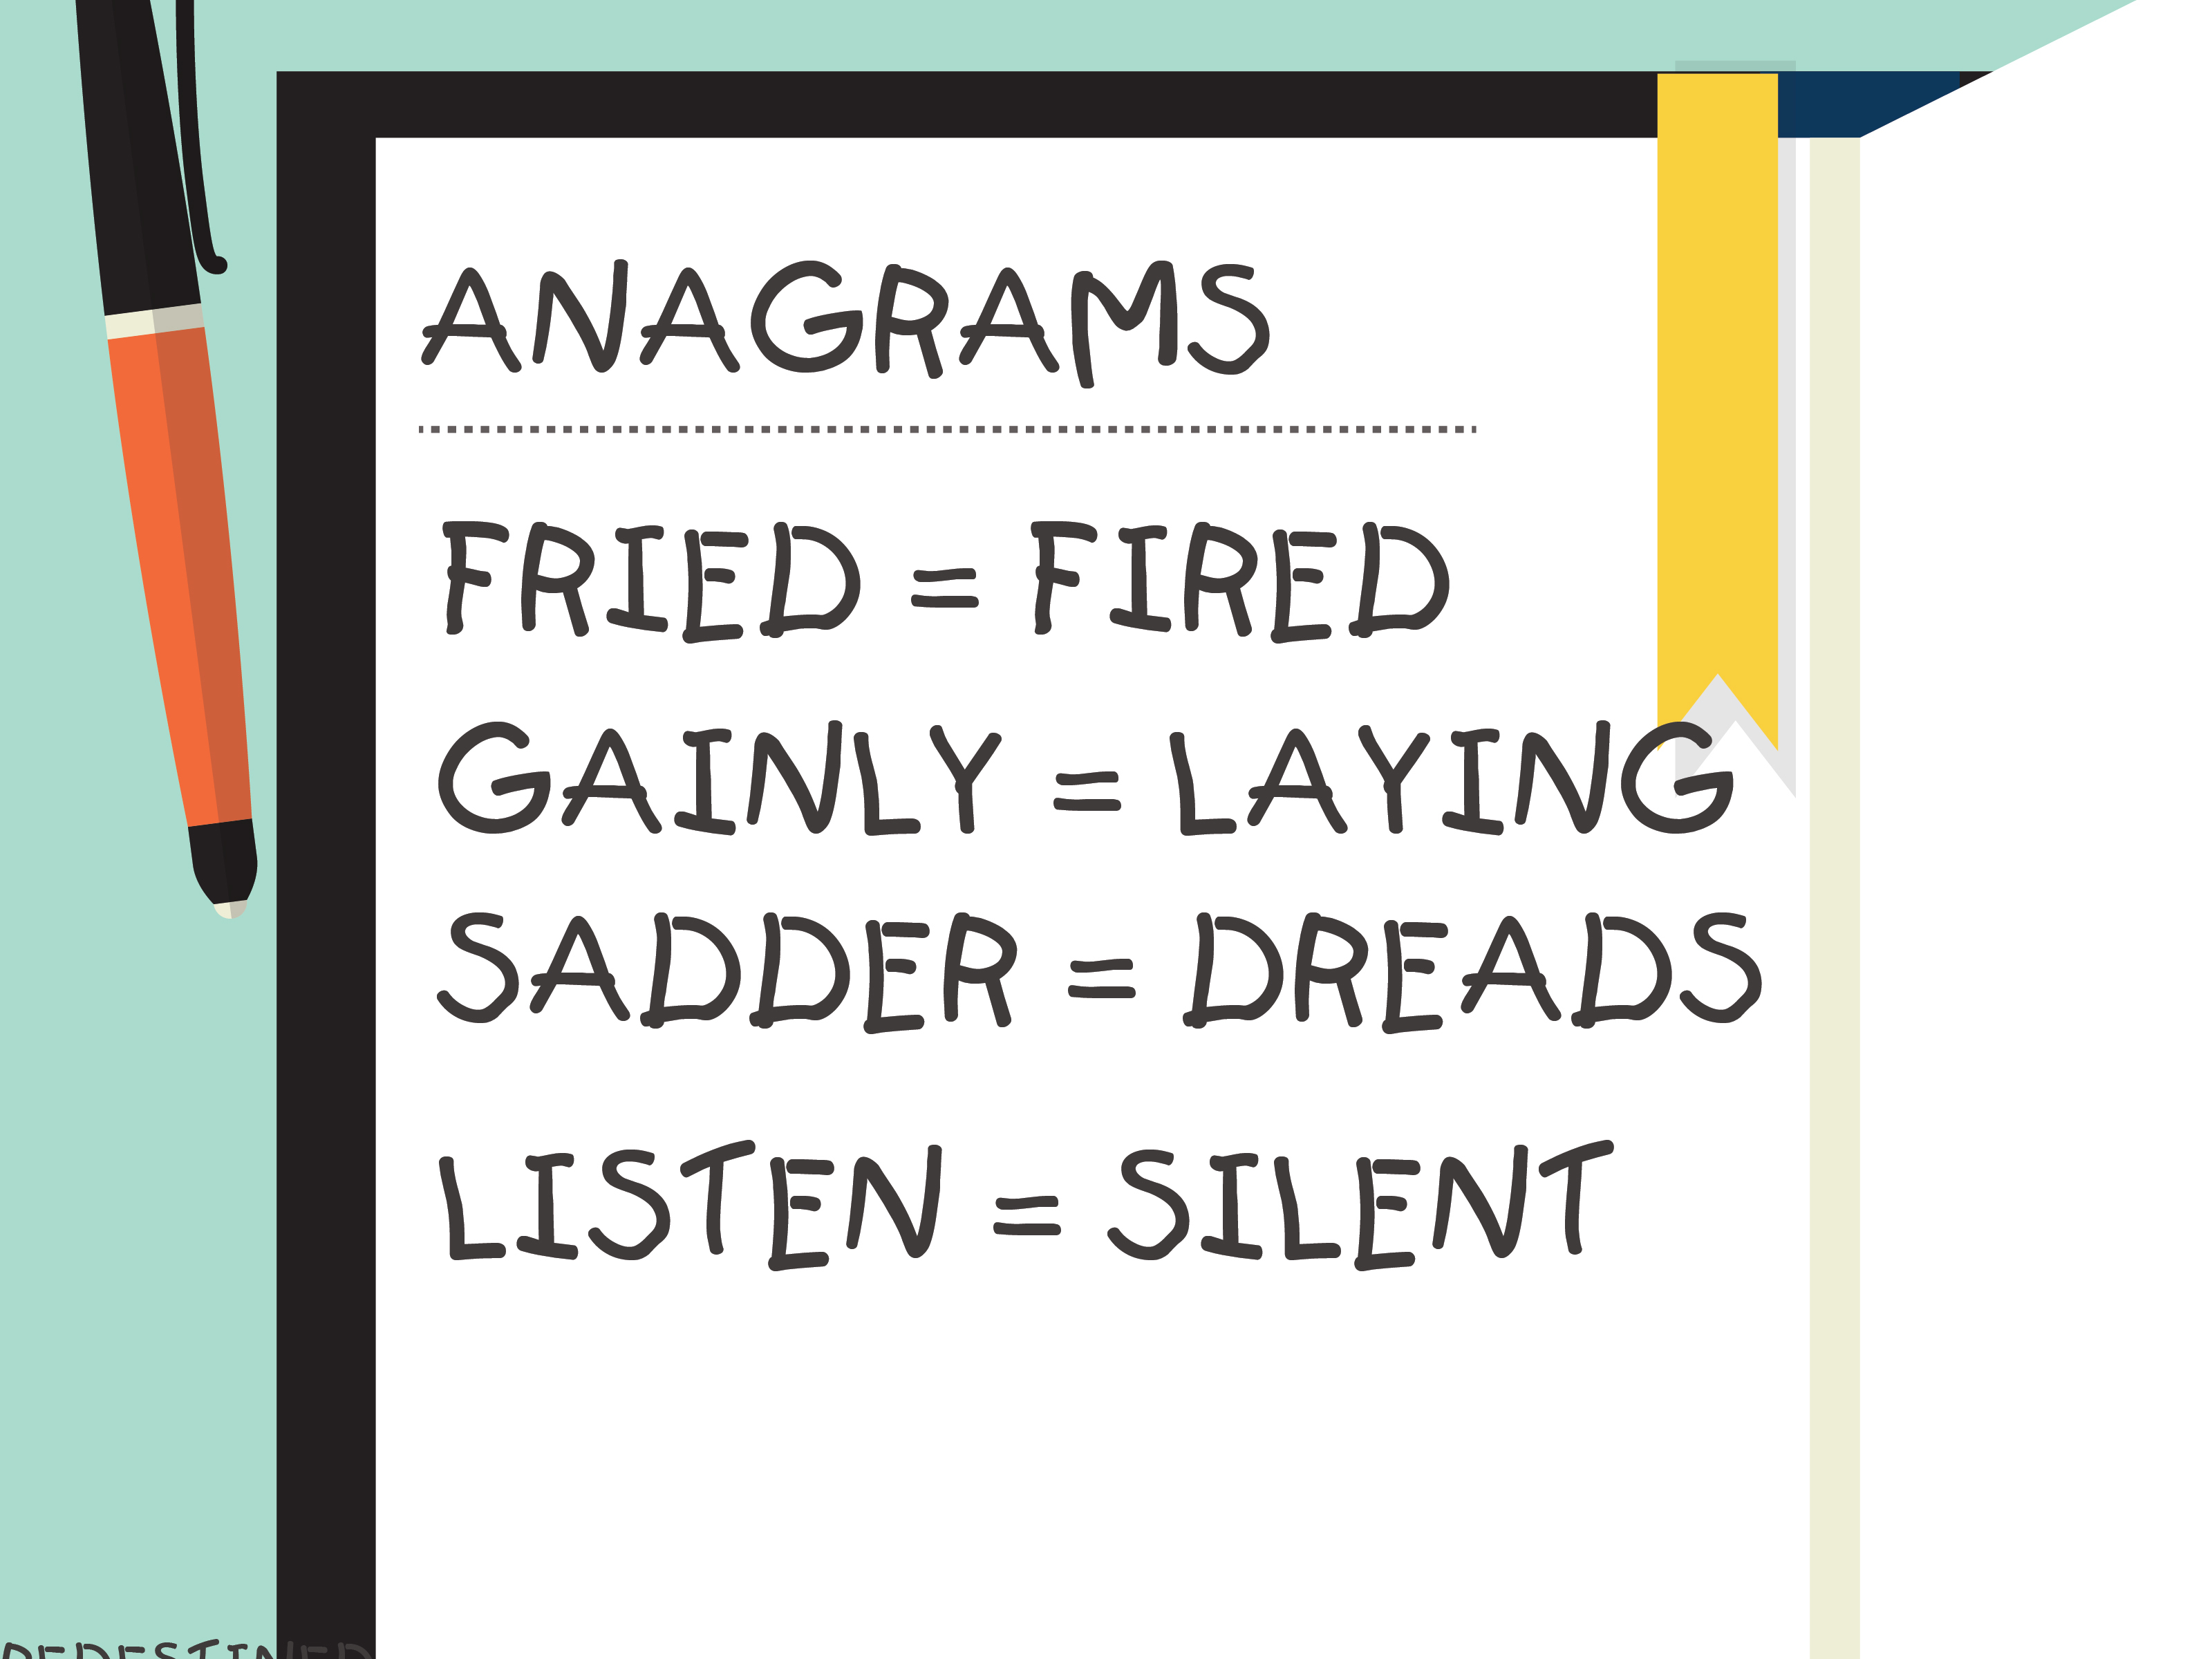 3-ways-to-solve-anagrams-effectively-wikihow-free-printable-anagram-magic-square-puzzles